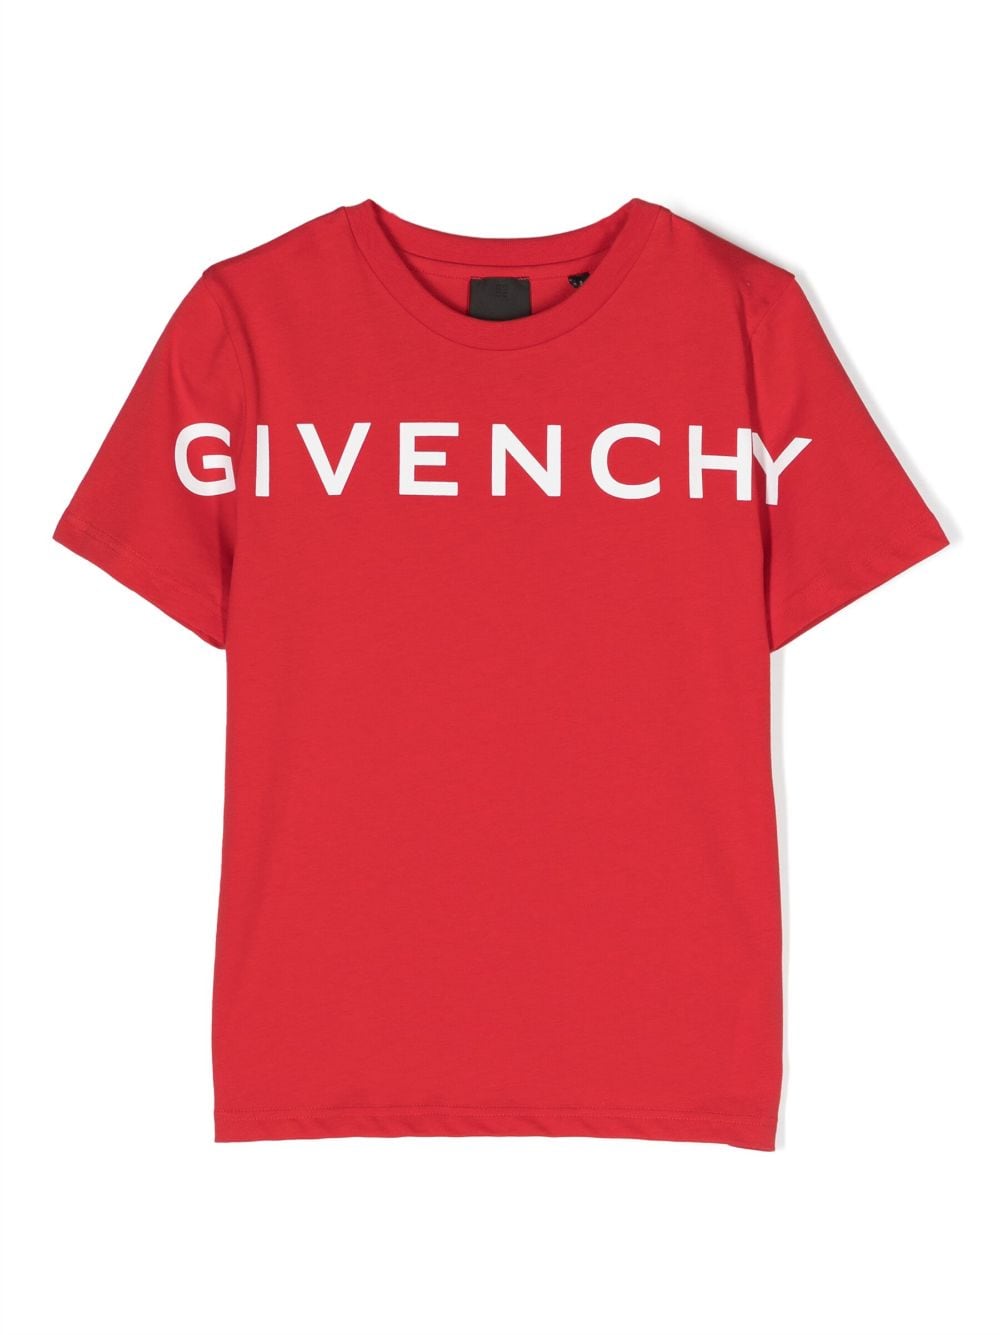 Red cotton jersey boy GIVENCHY t-shirt